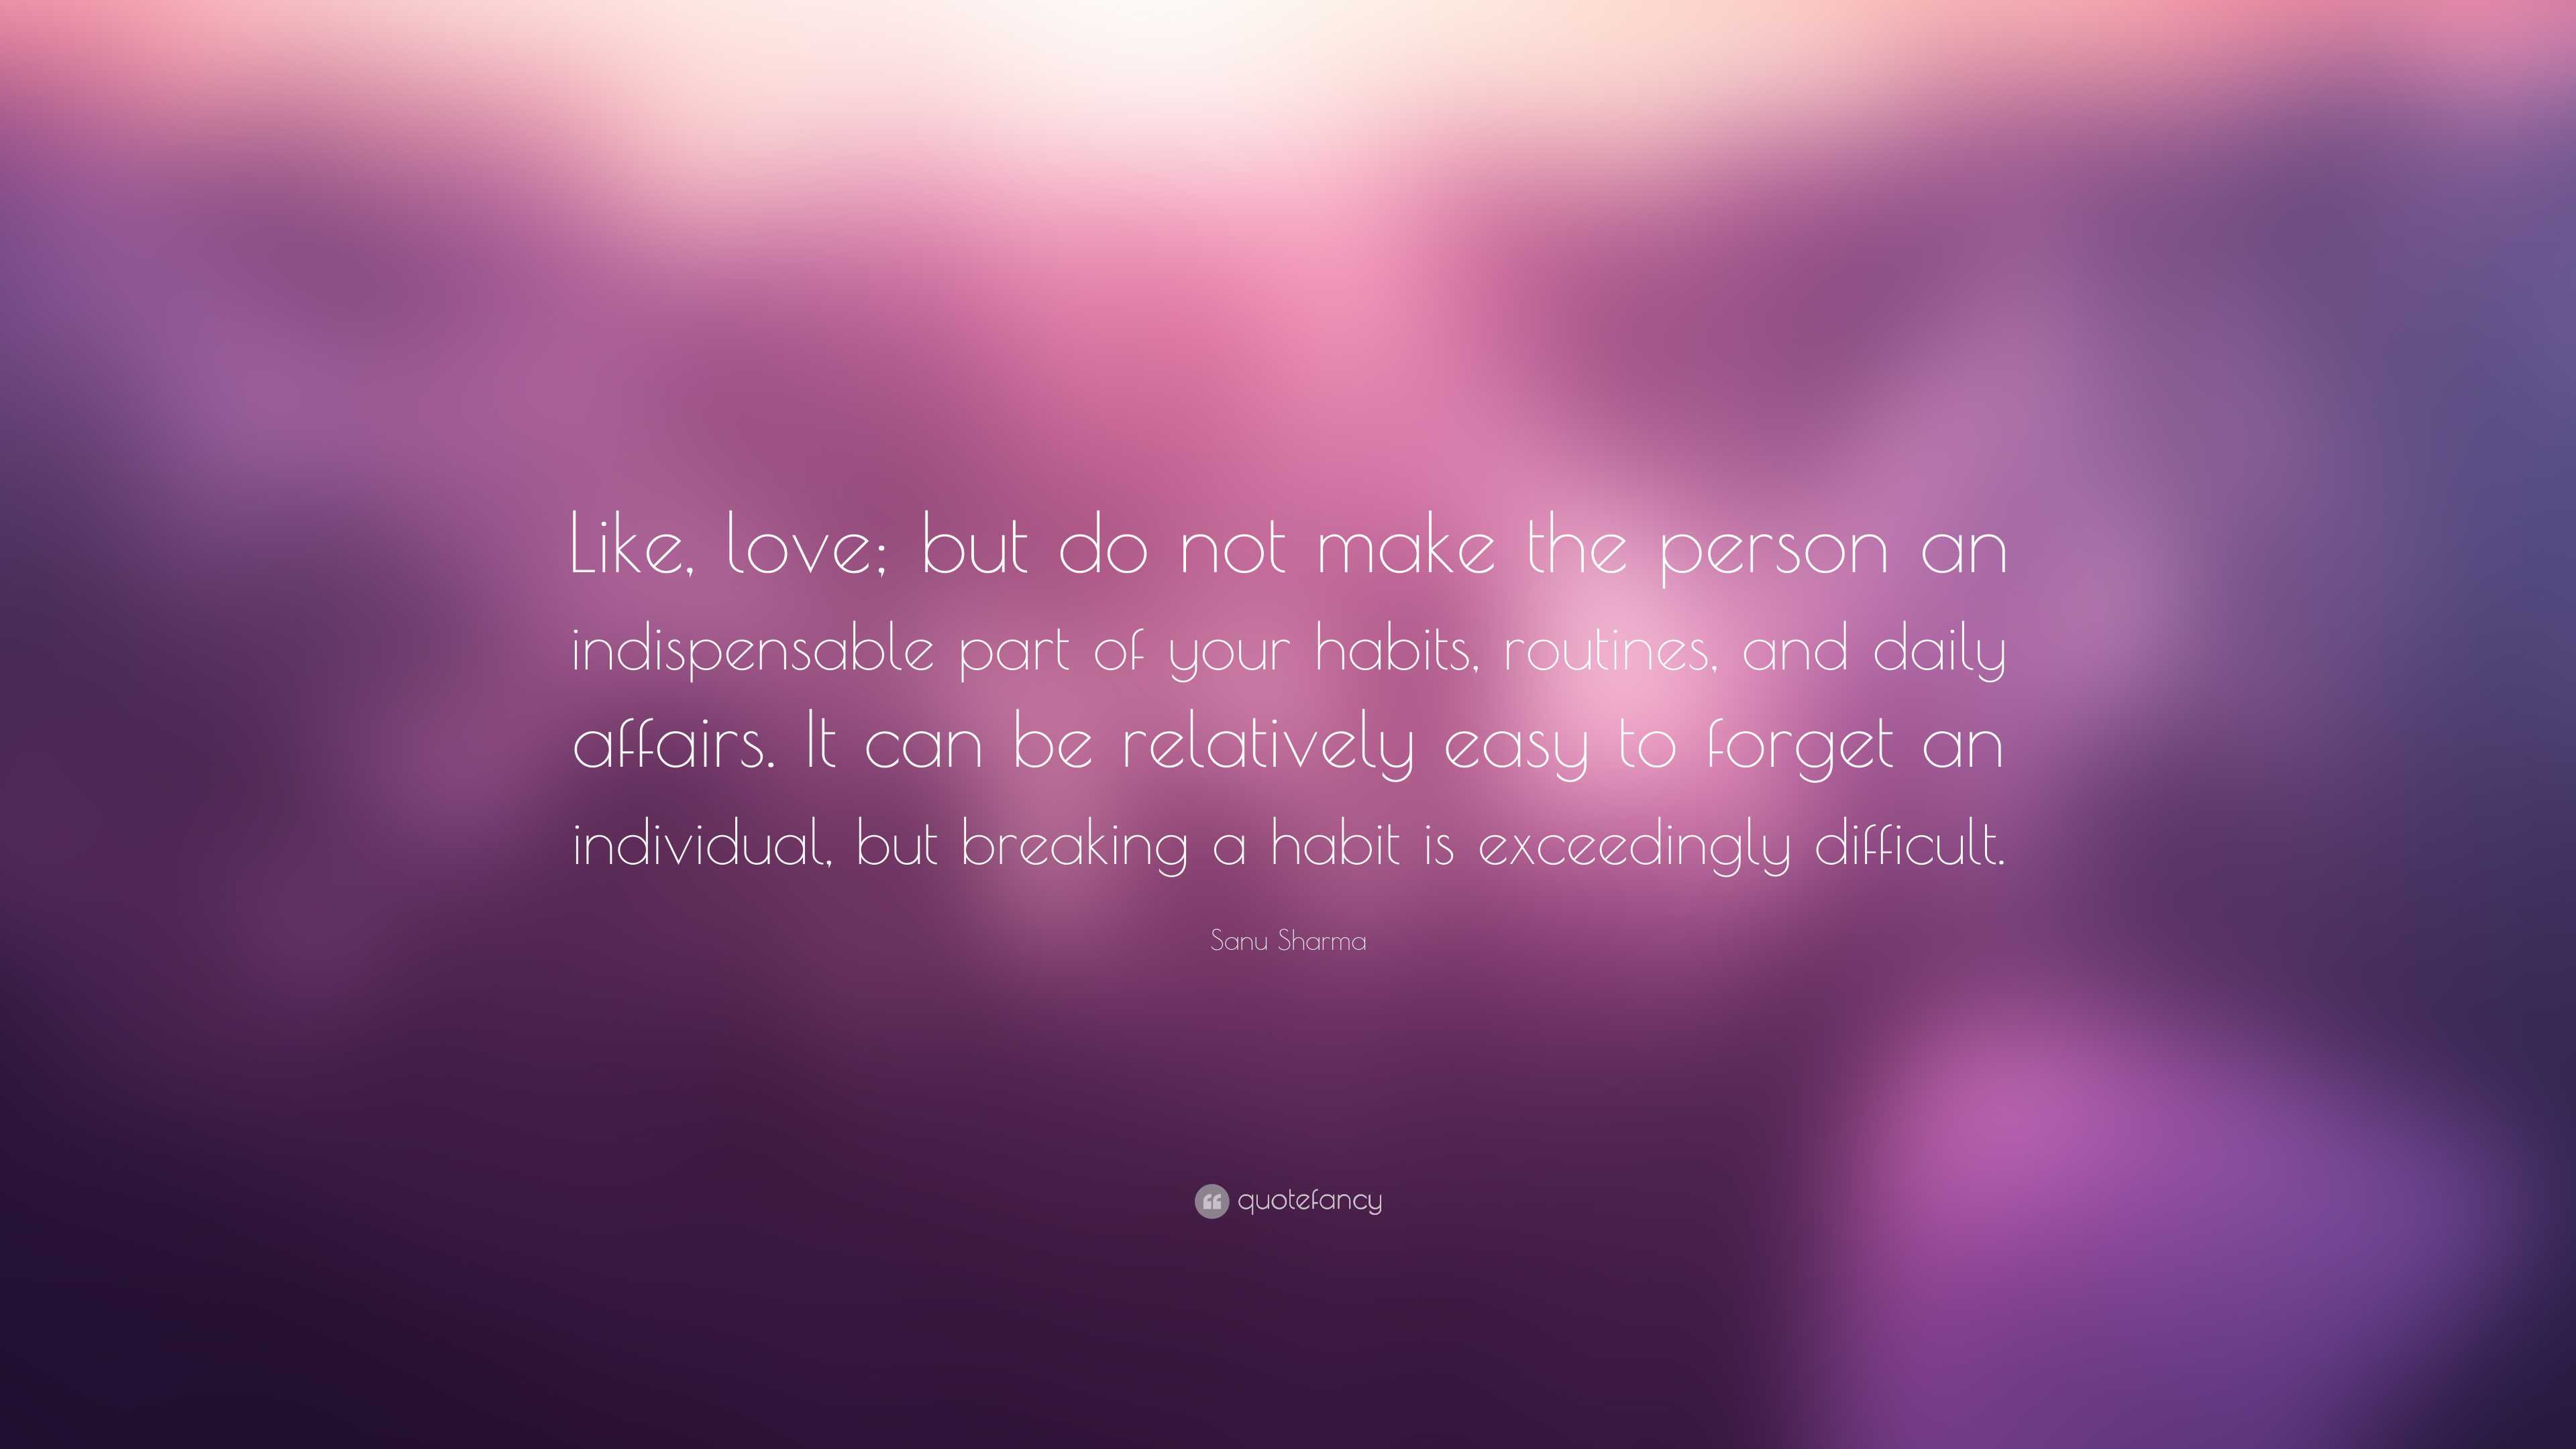 Sanu Sharma Quote: “Like, love; but do not make the person an ...